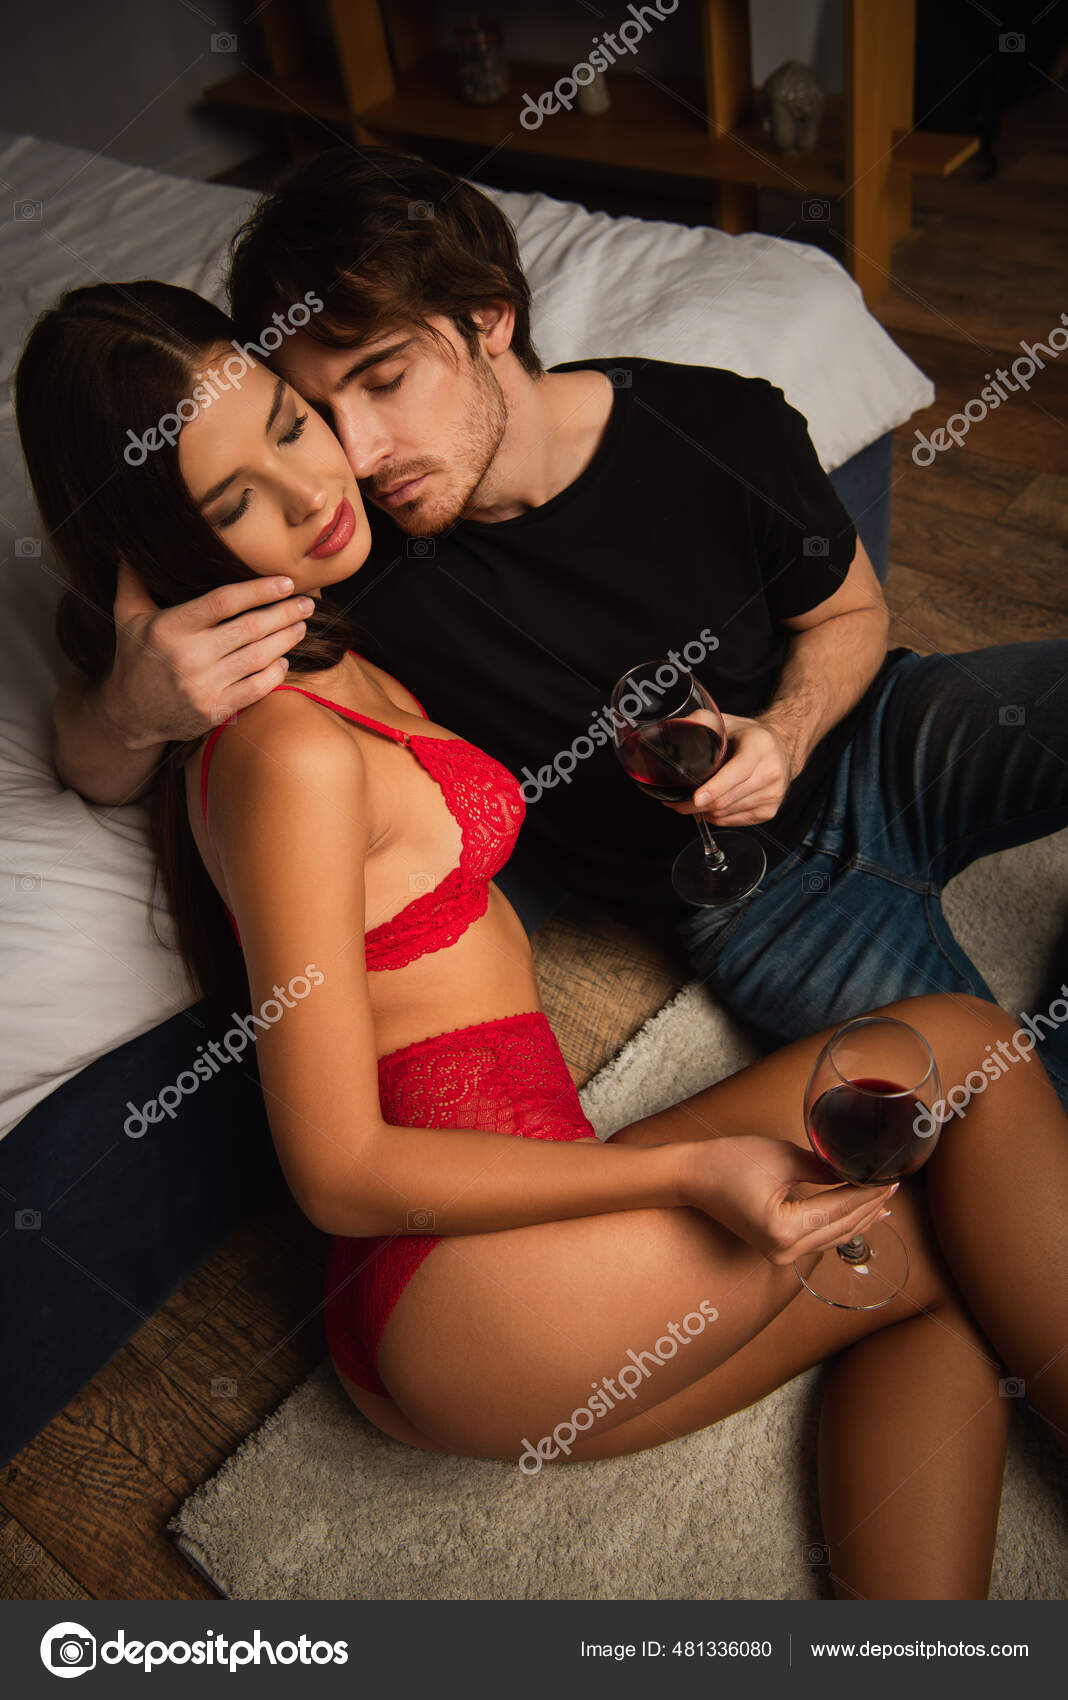 Young Man Embracing Seductive Woman Red Lingerie Floor Bedroom Stock Photo by ©Ischukigor 481336080 pic